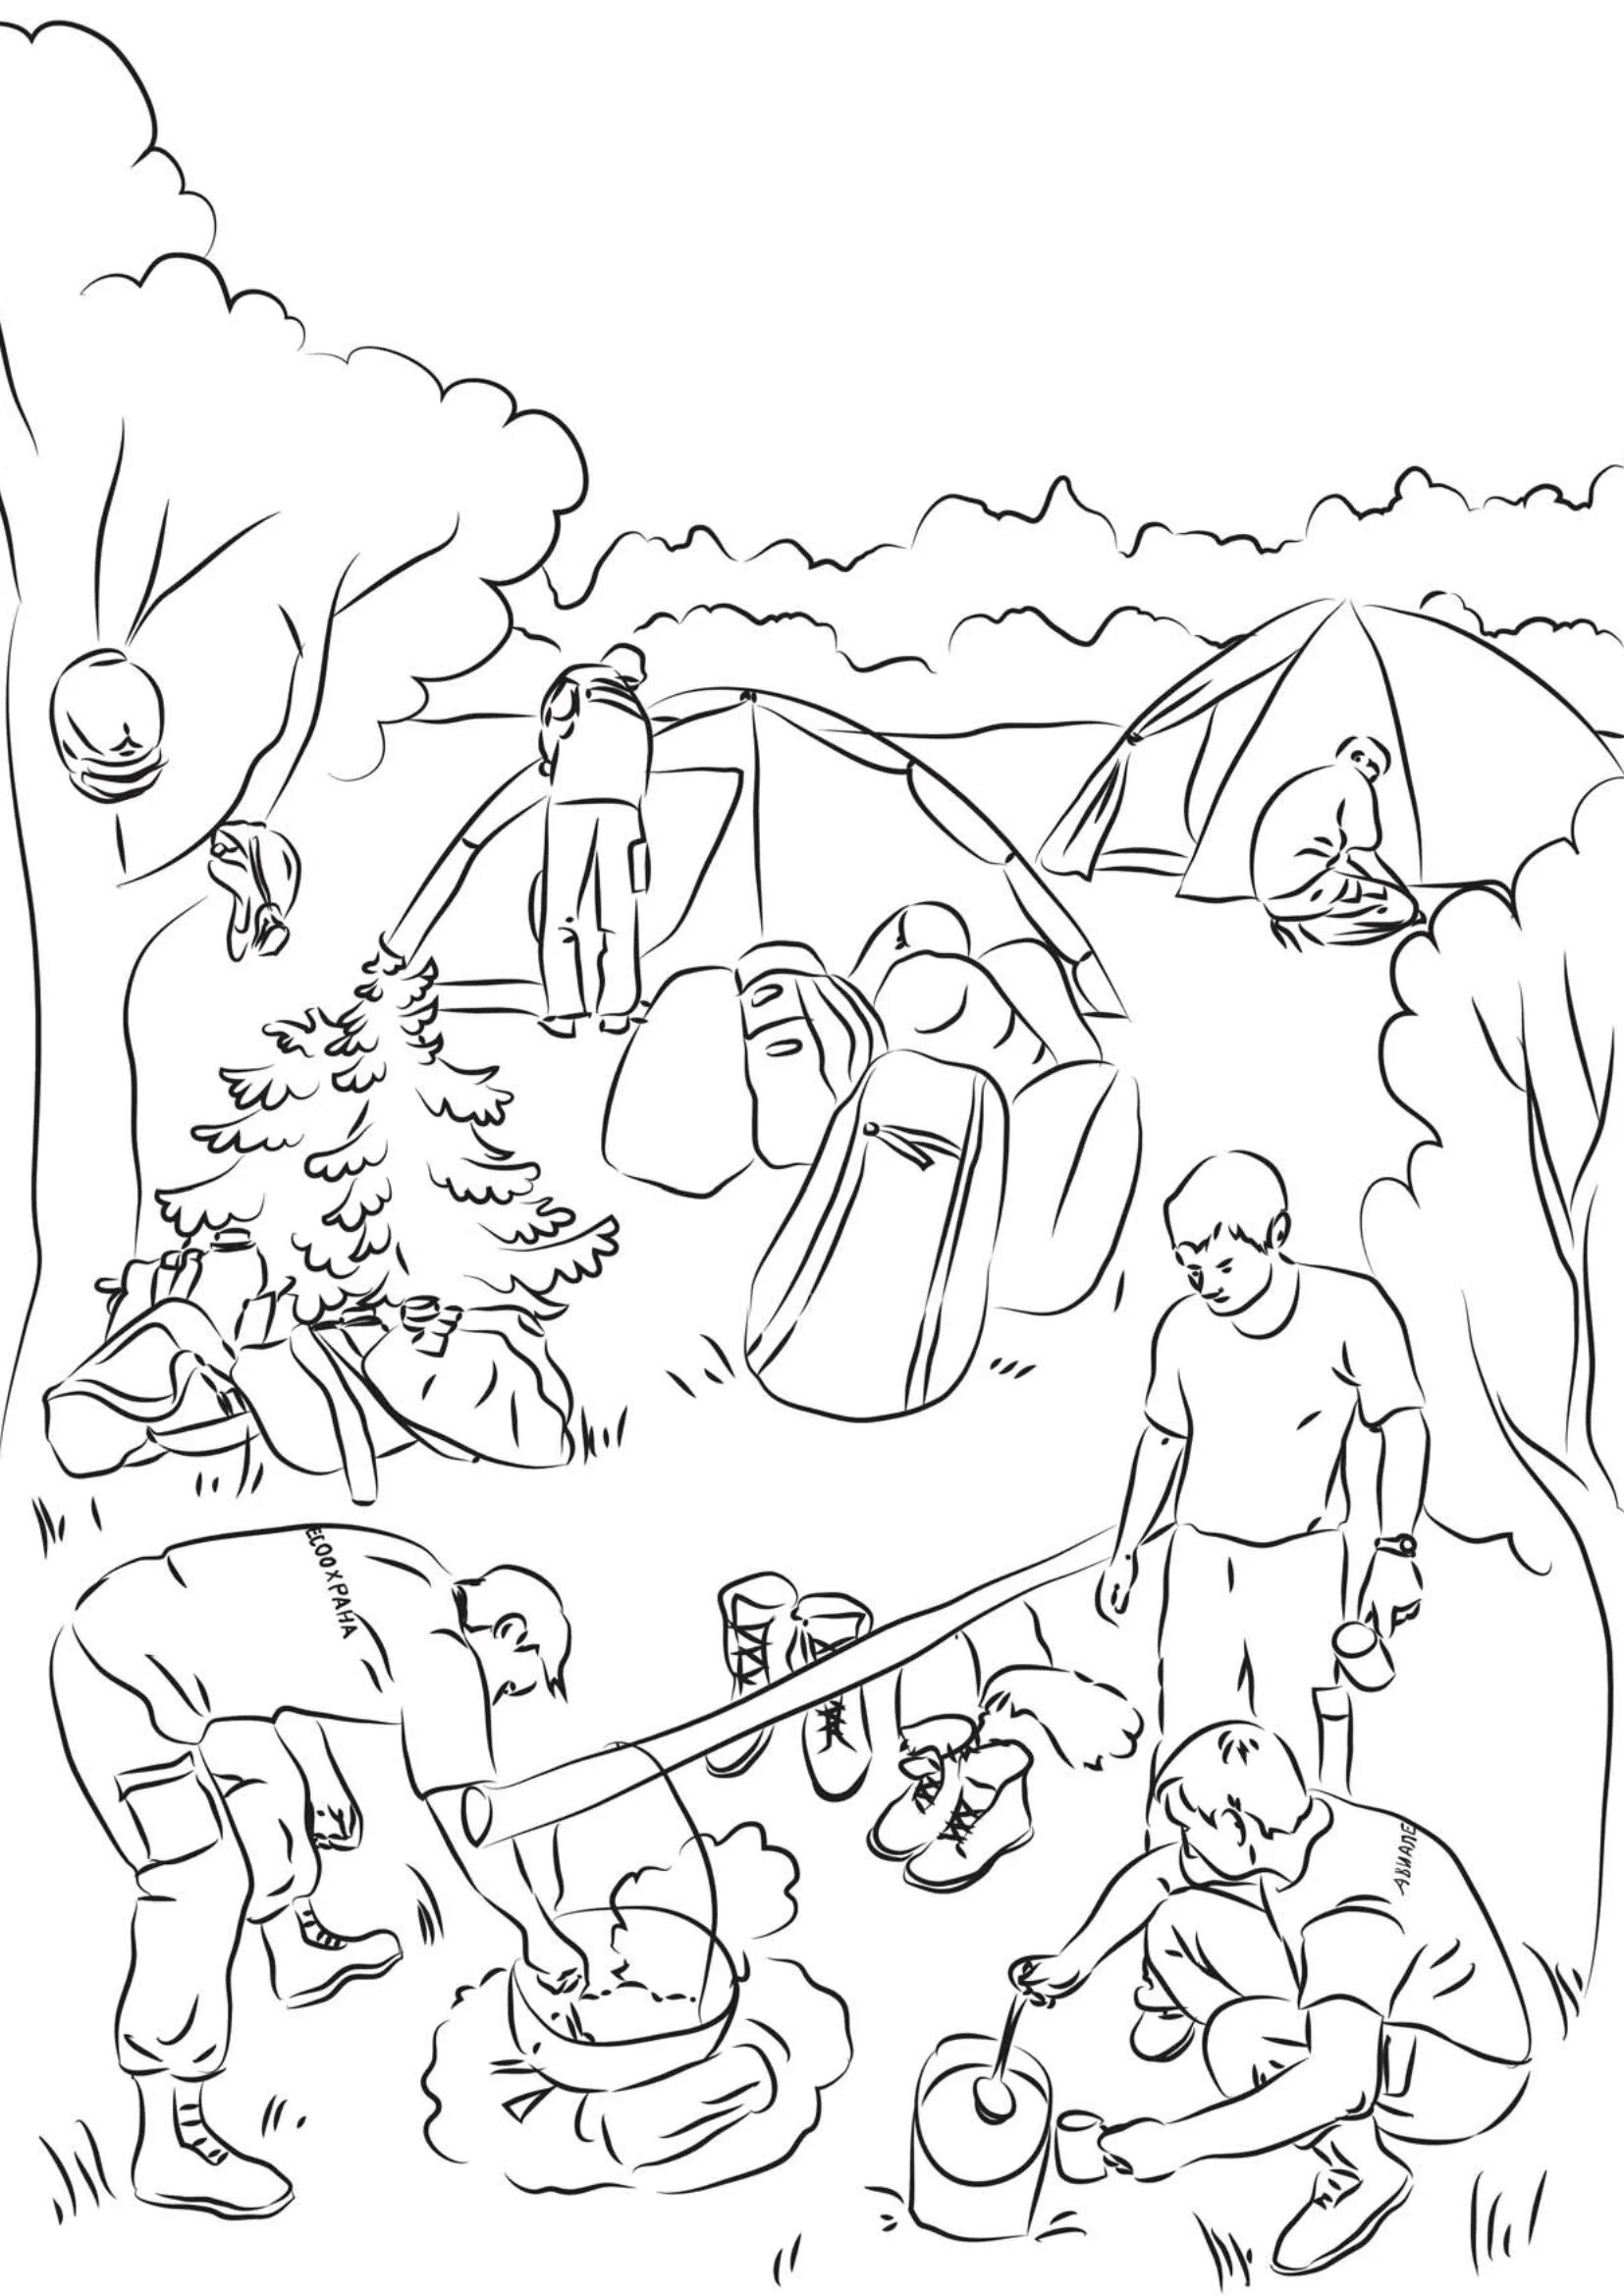 Glorious forest fire coloring page